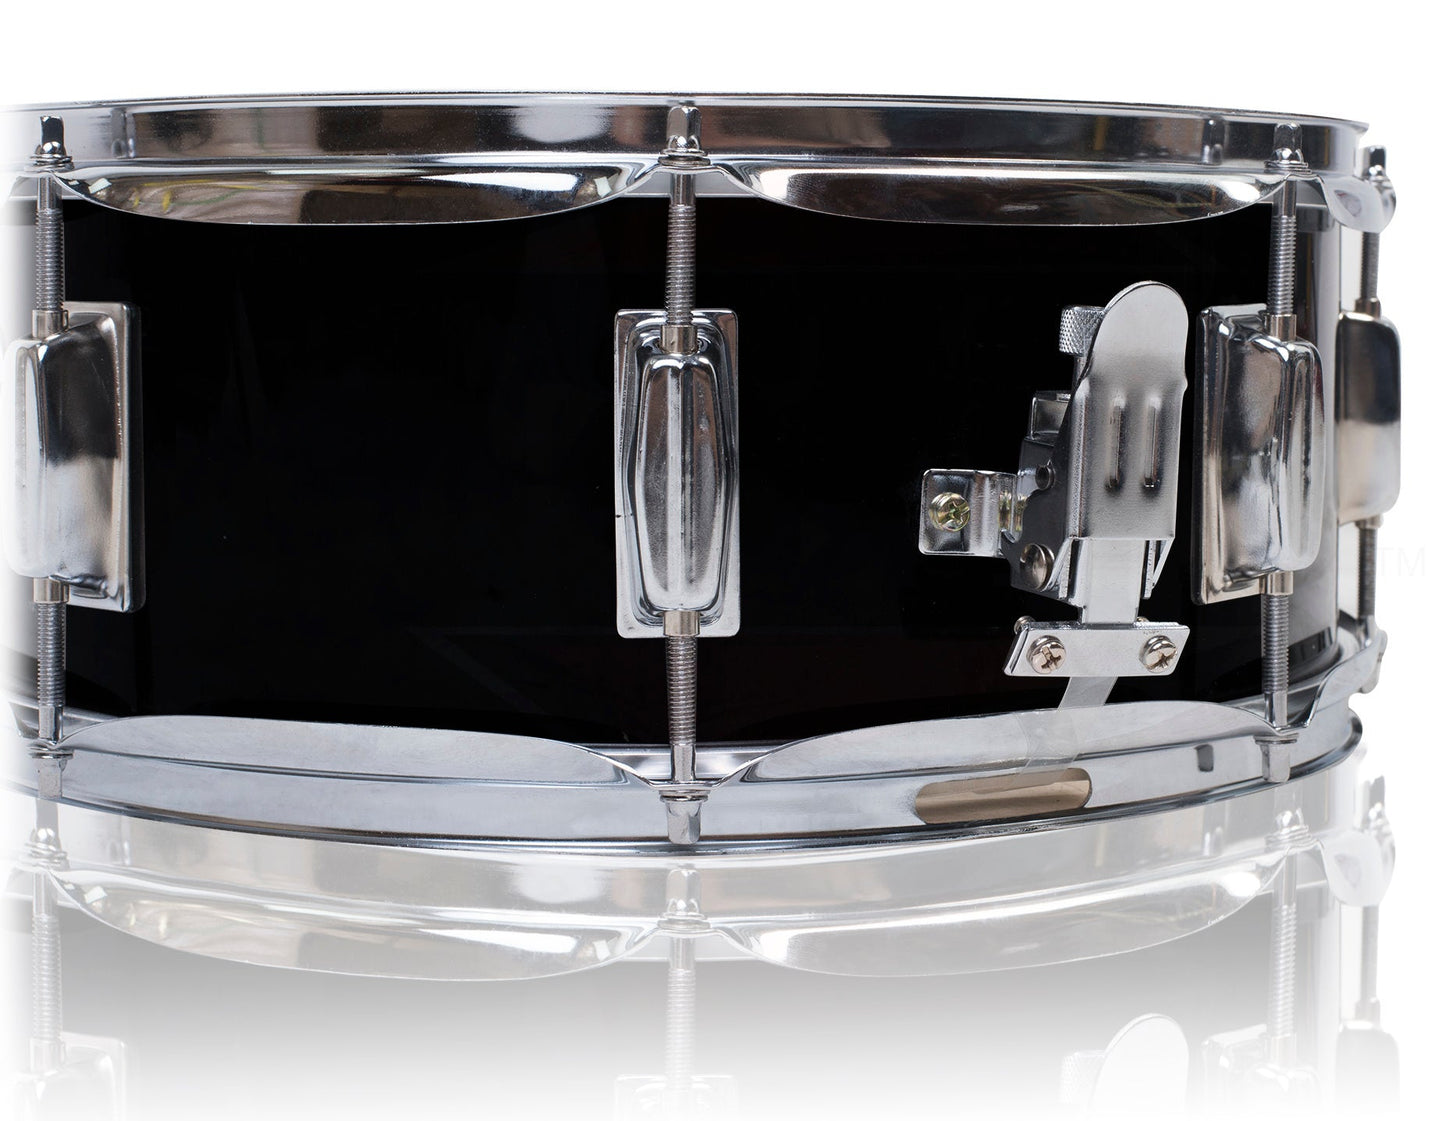 GRIFFIN Snare Drum - Poplar Wood Shell 14" x 5.5" with Black PVC & Coated Head - Acoustic Marching Percussion Musical Instrument Set with Drummers Key